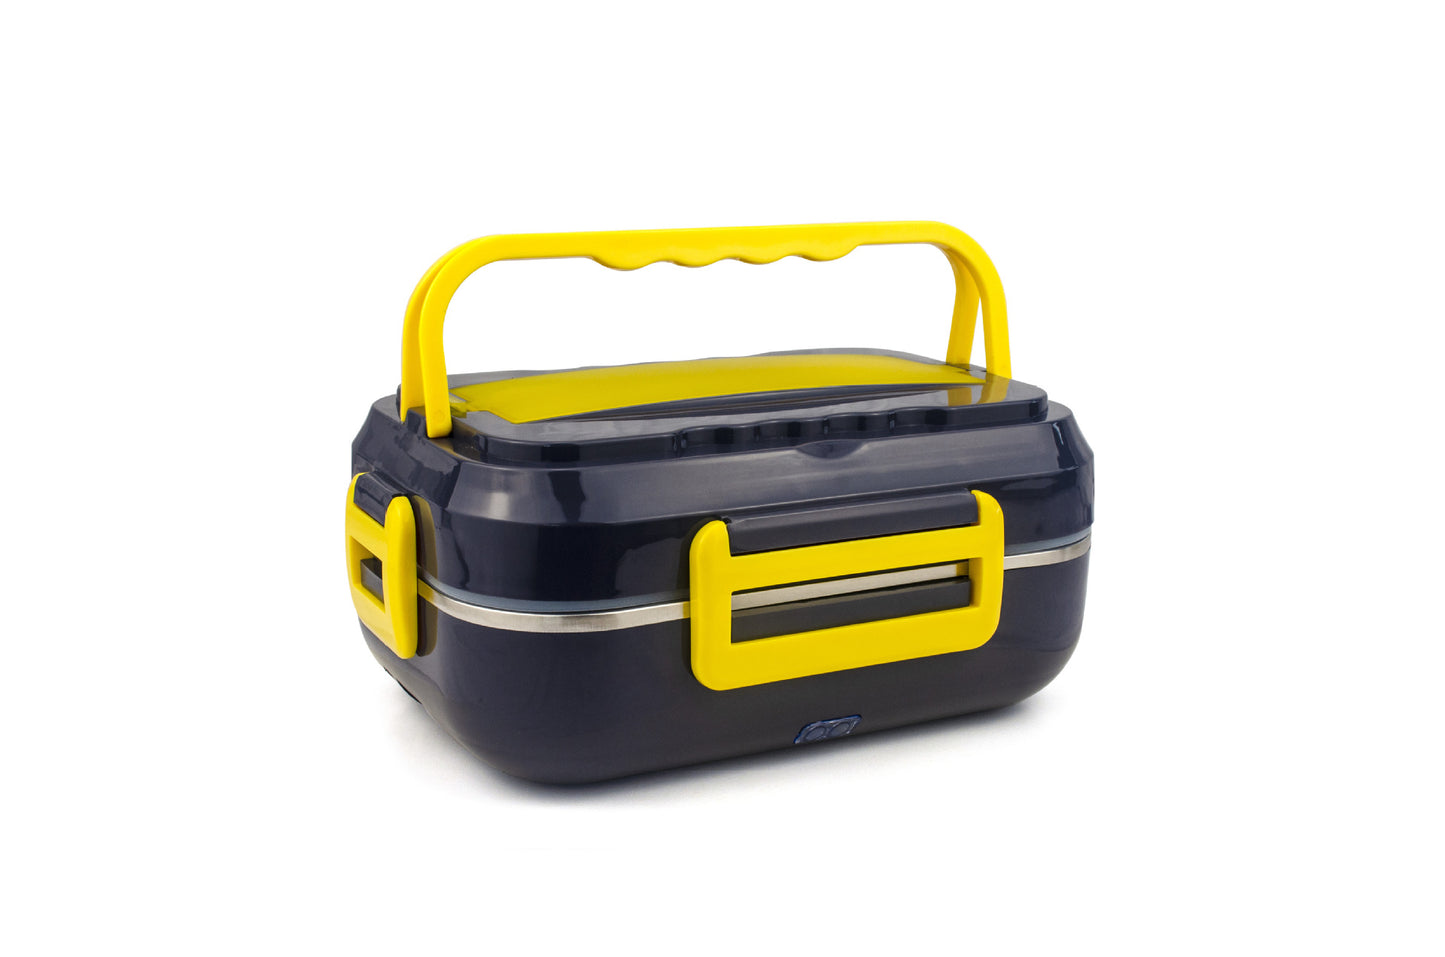 Electric Lunch Boxes